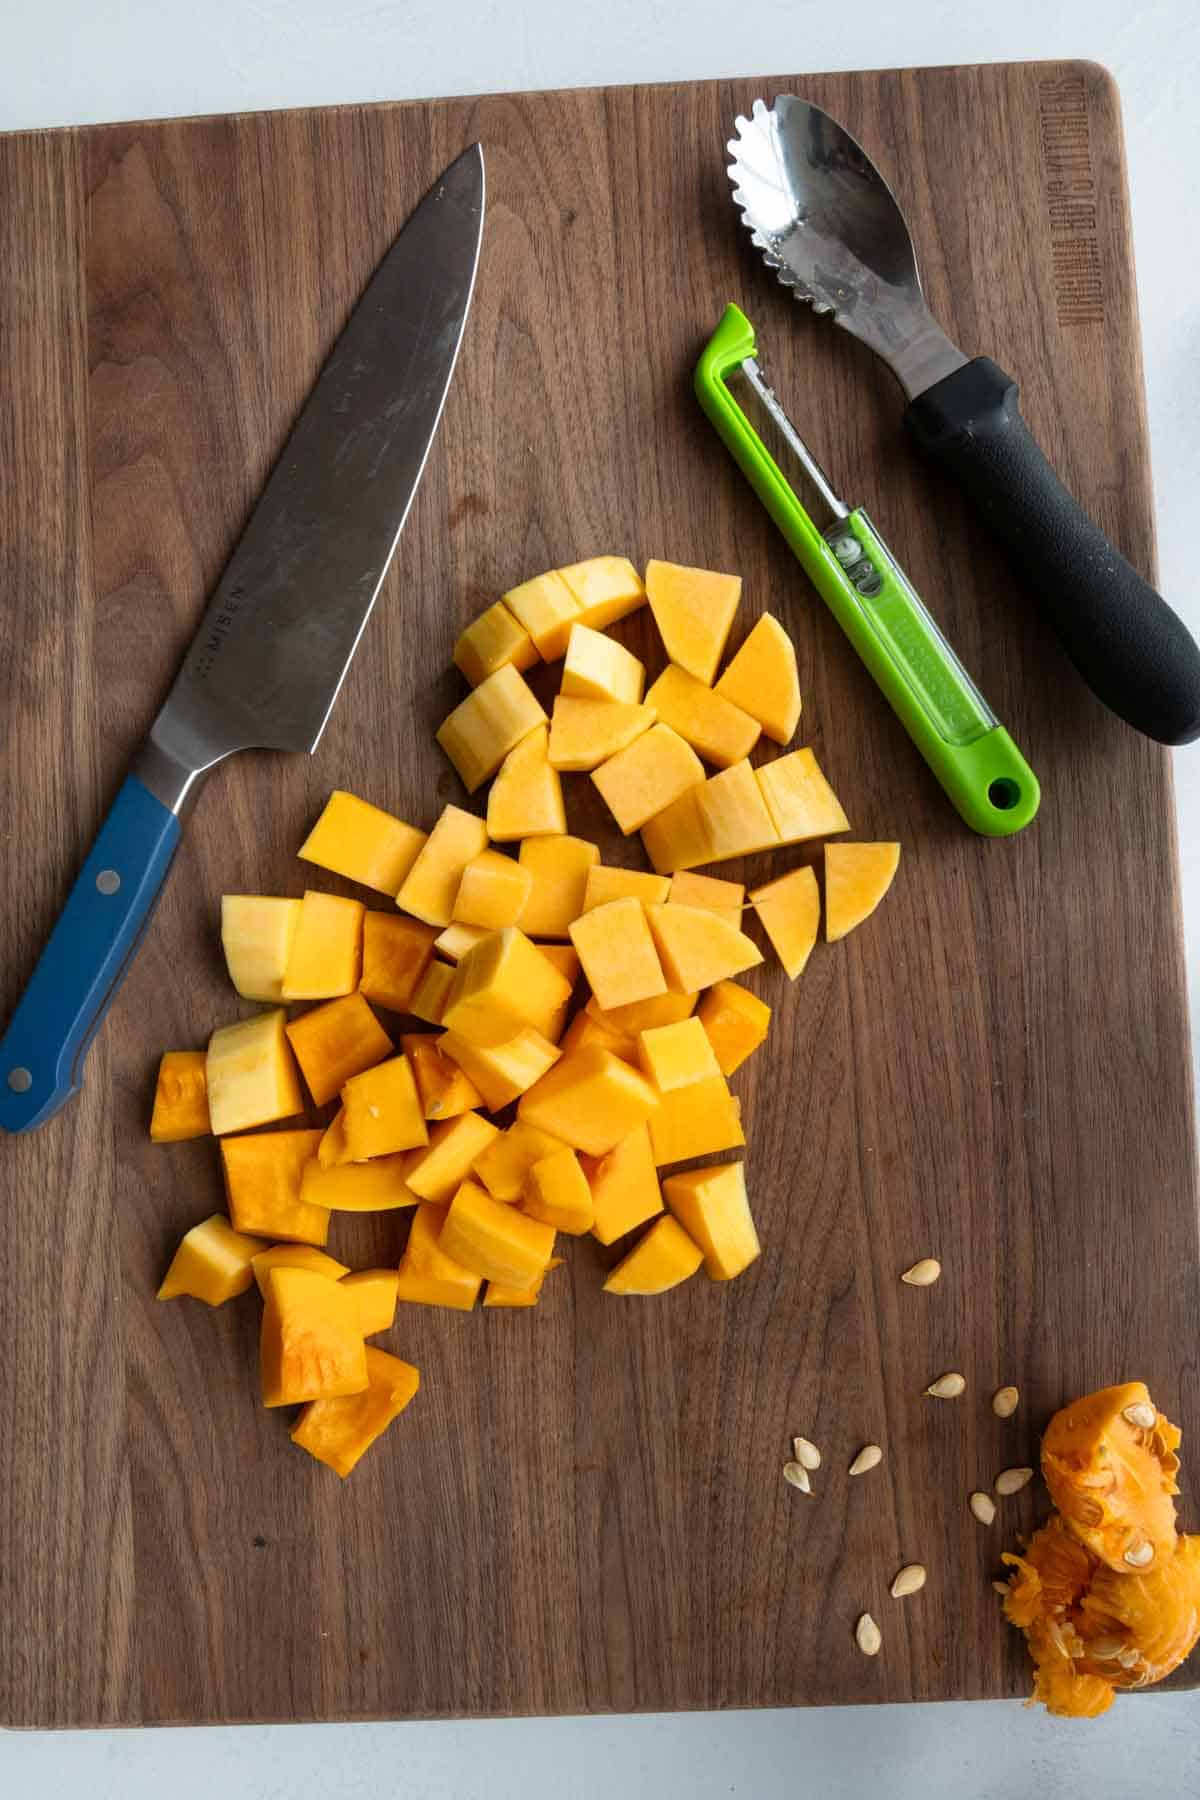 Cubed butternut squash on a wooden cutting board with a chef's knife, peeler, and scooping spoon.